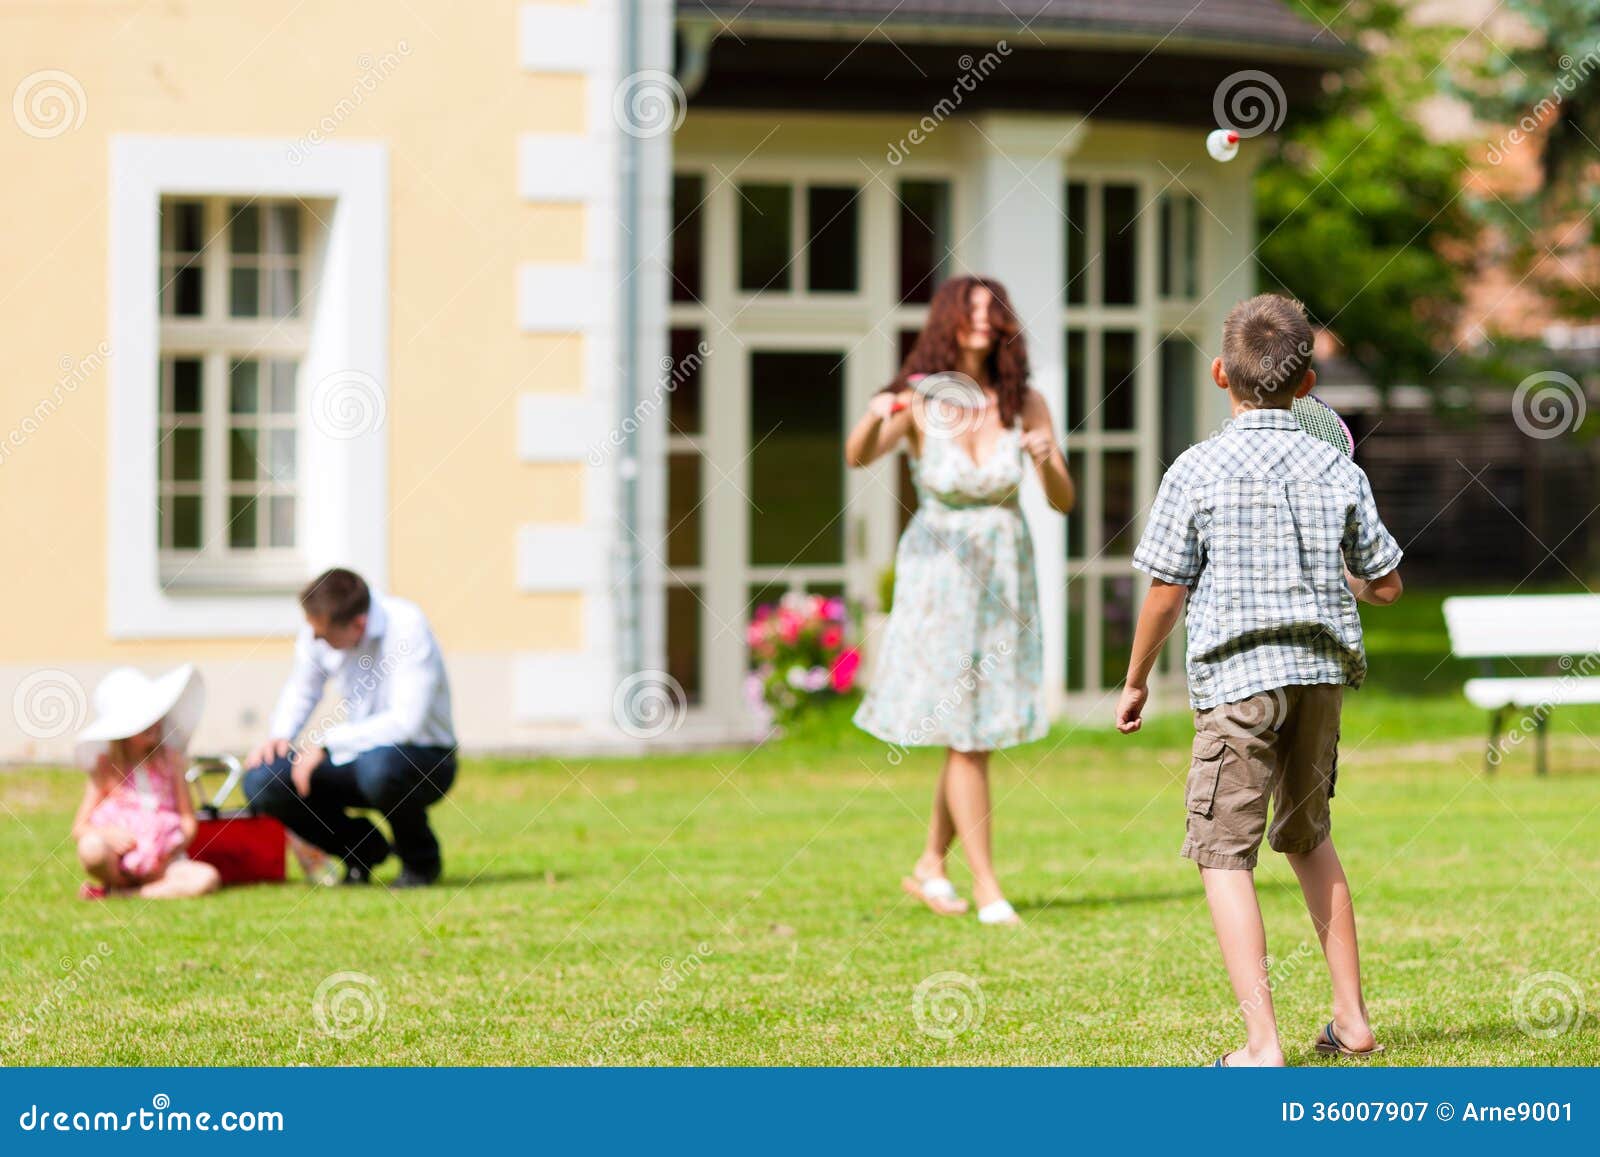 Family Is Playing In Summer In Front Of Their House Royalty Free ...